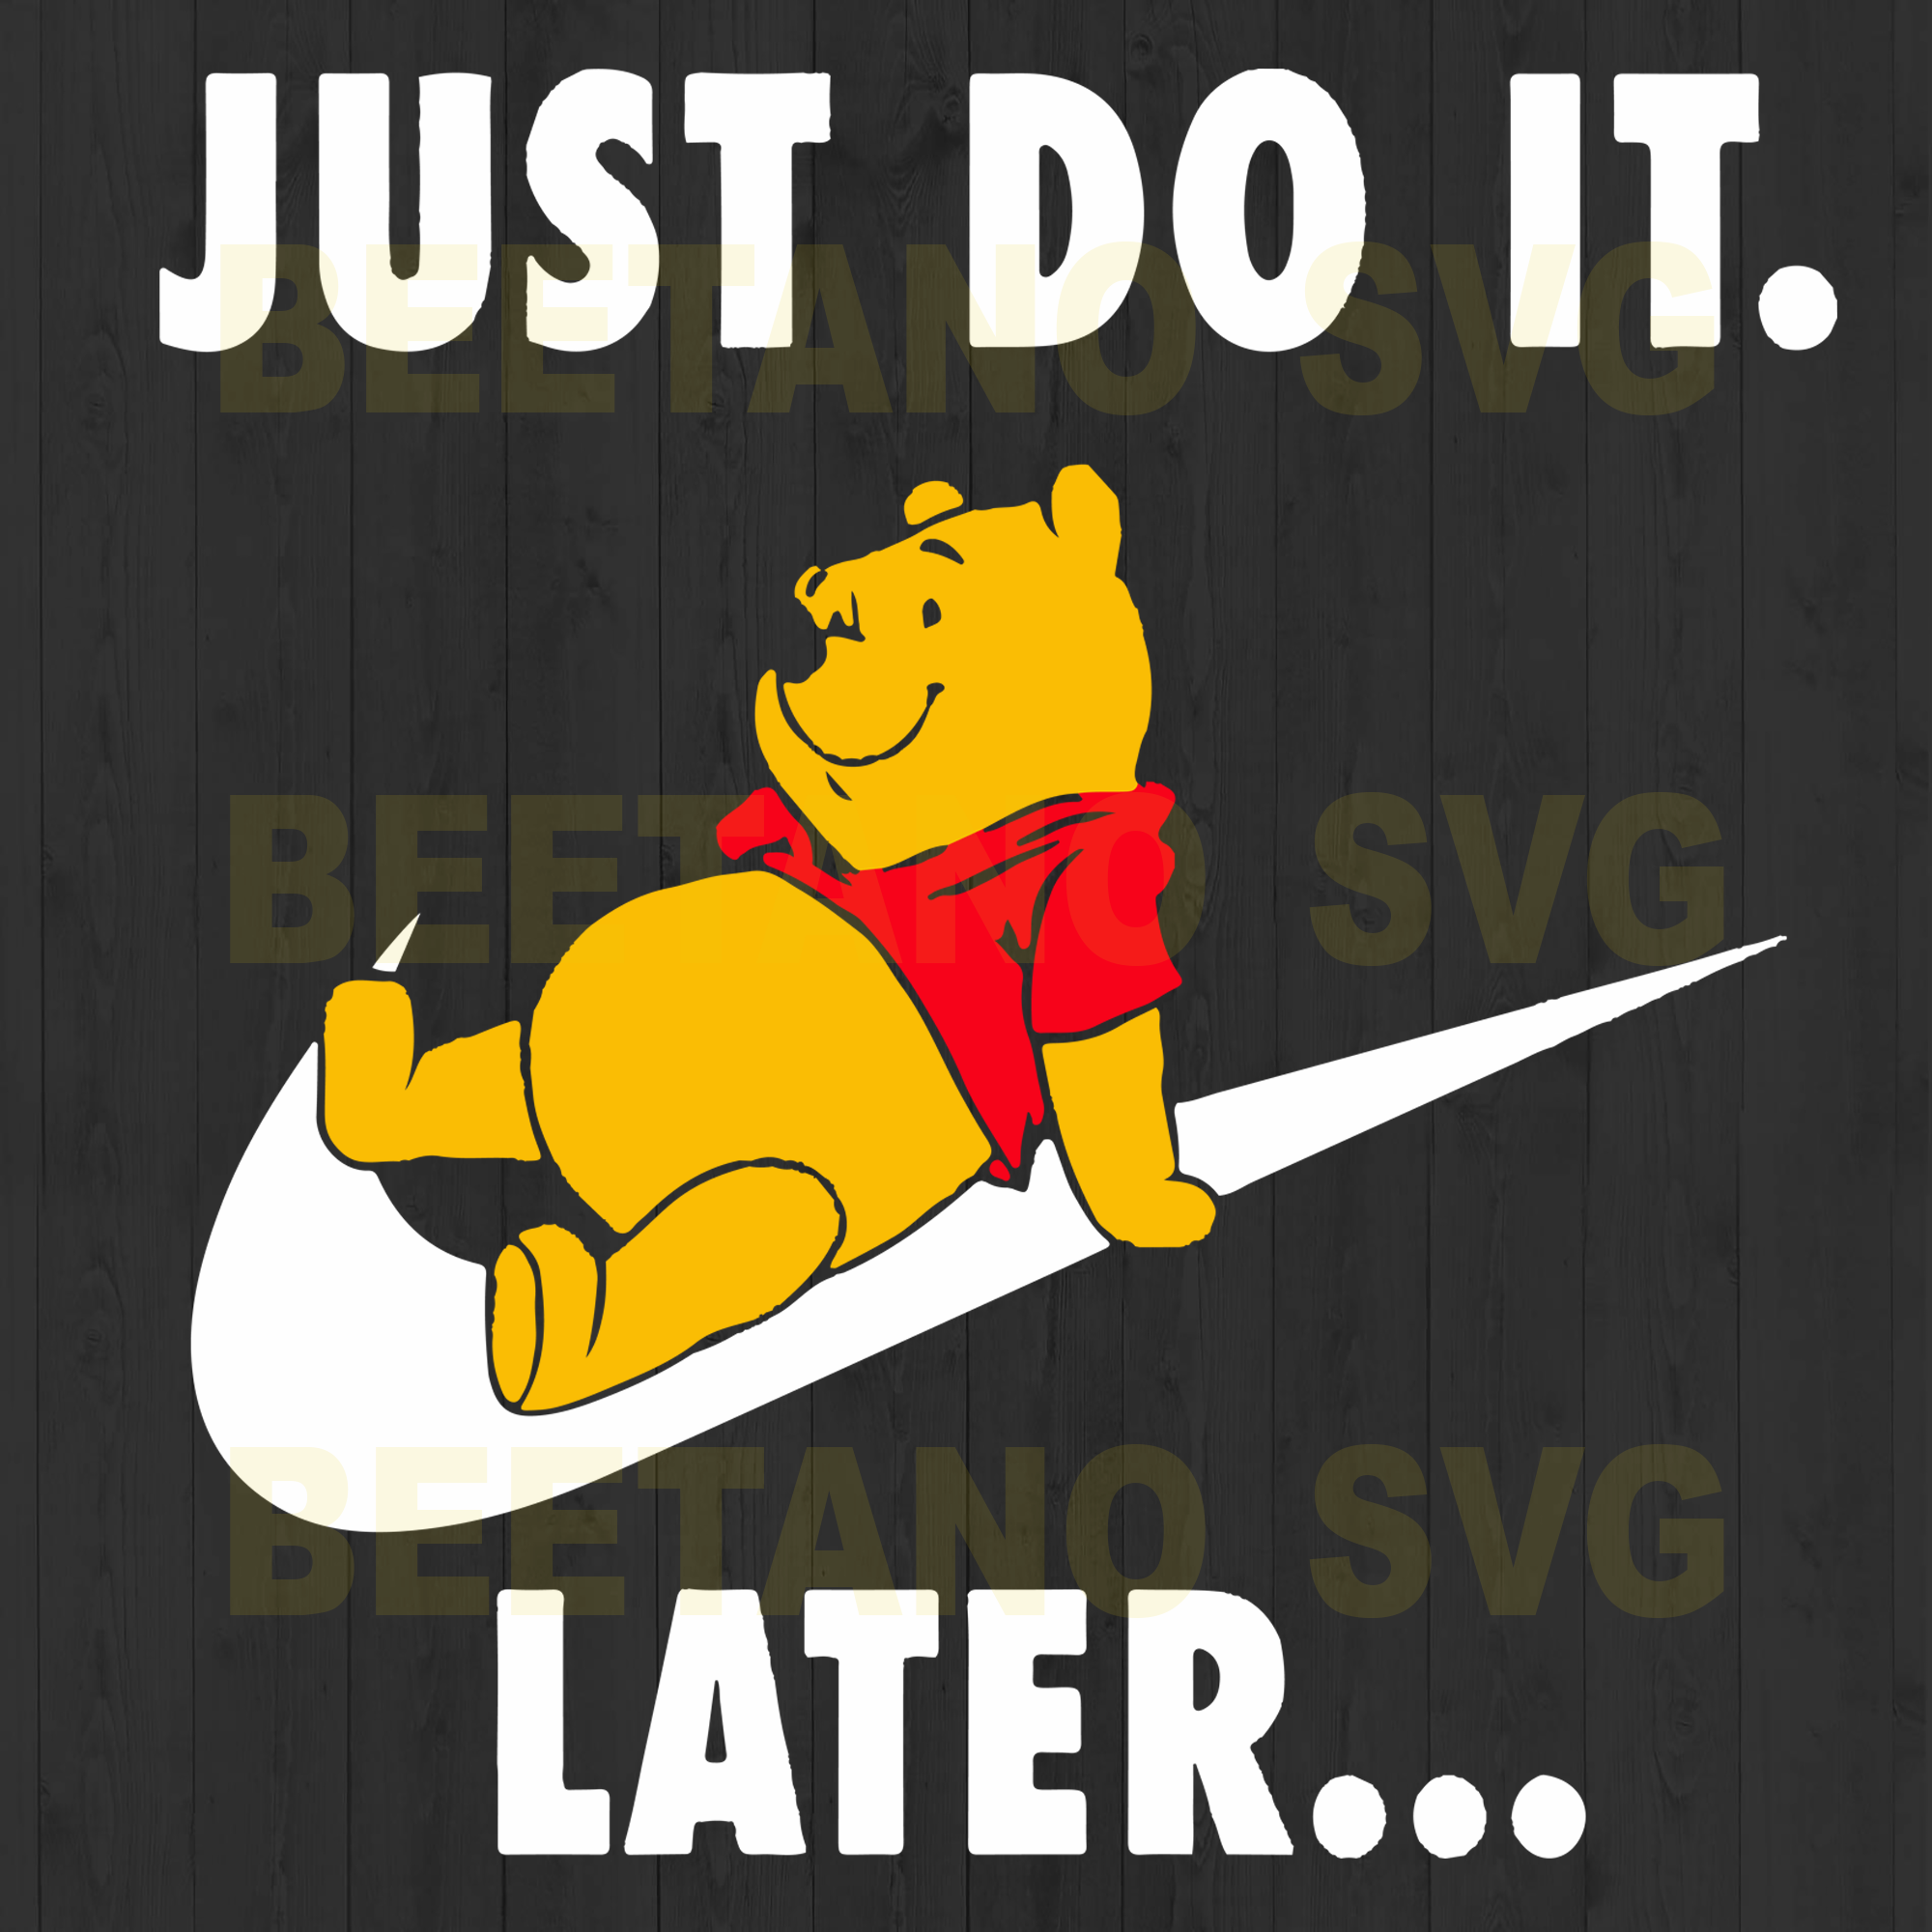 Download Winnie Pooh Just Do It Later Svg Winnie The Pooh Svg Just Do It Late Beetanosvg Scalable Vector Graphics